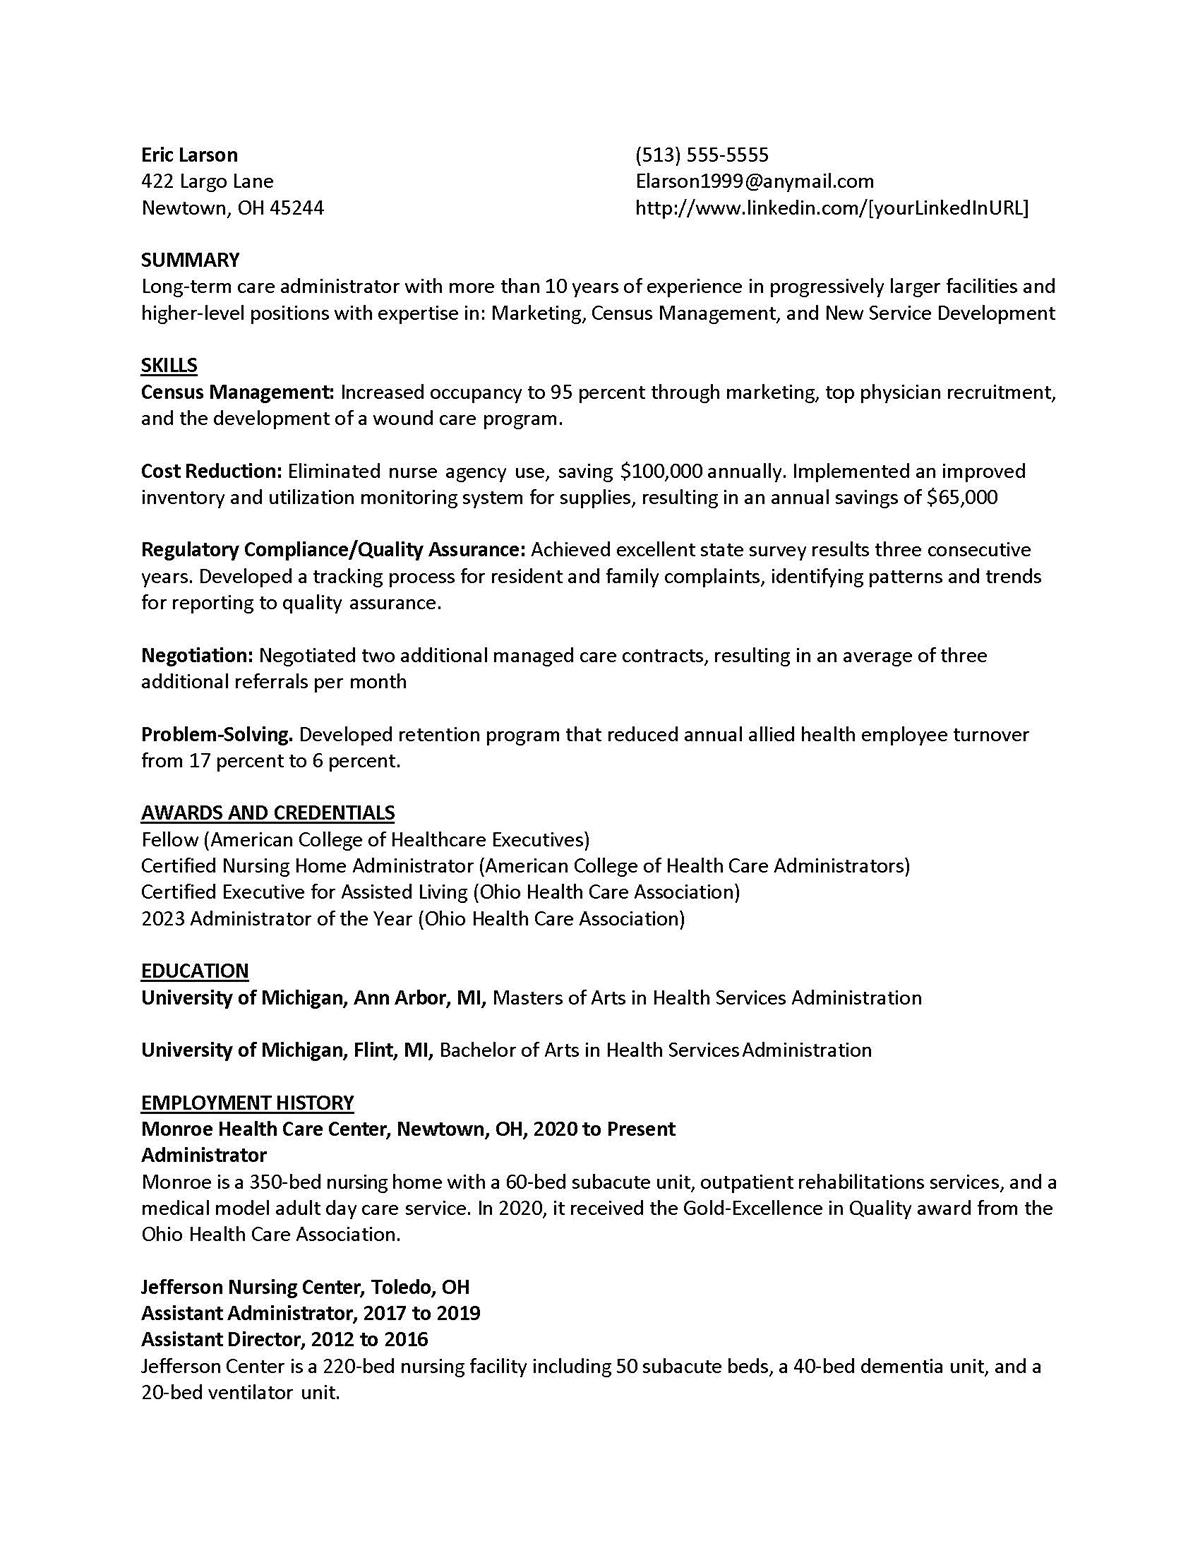 Sample resume: Health Care Management, High Experience, Functional